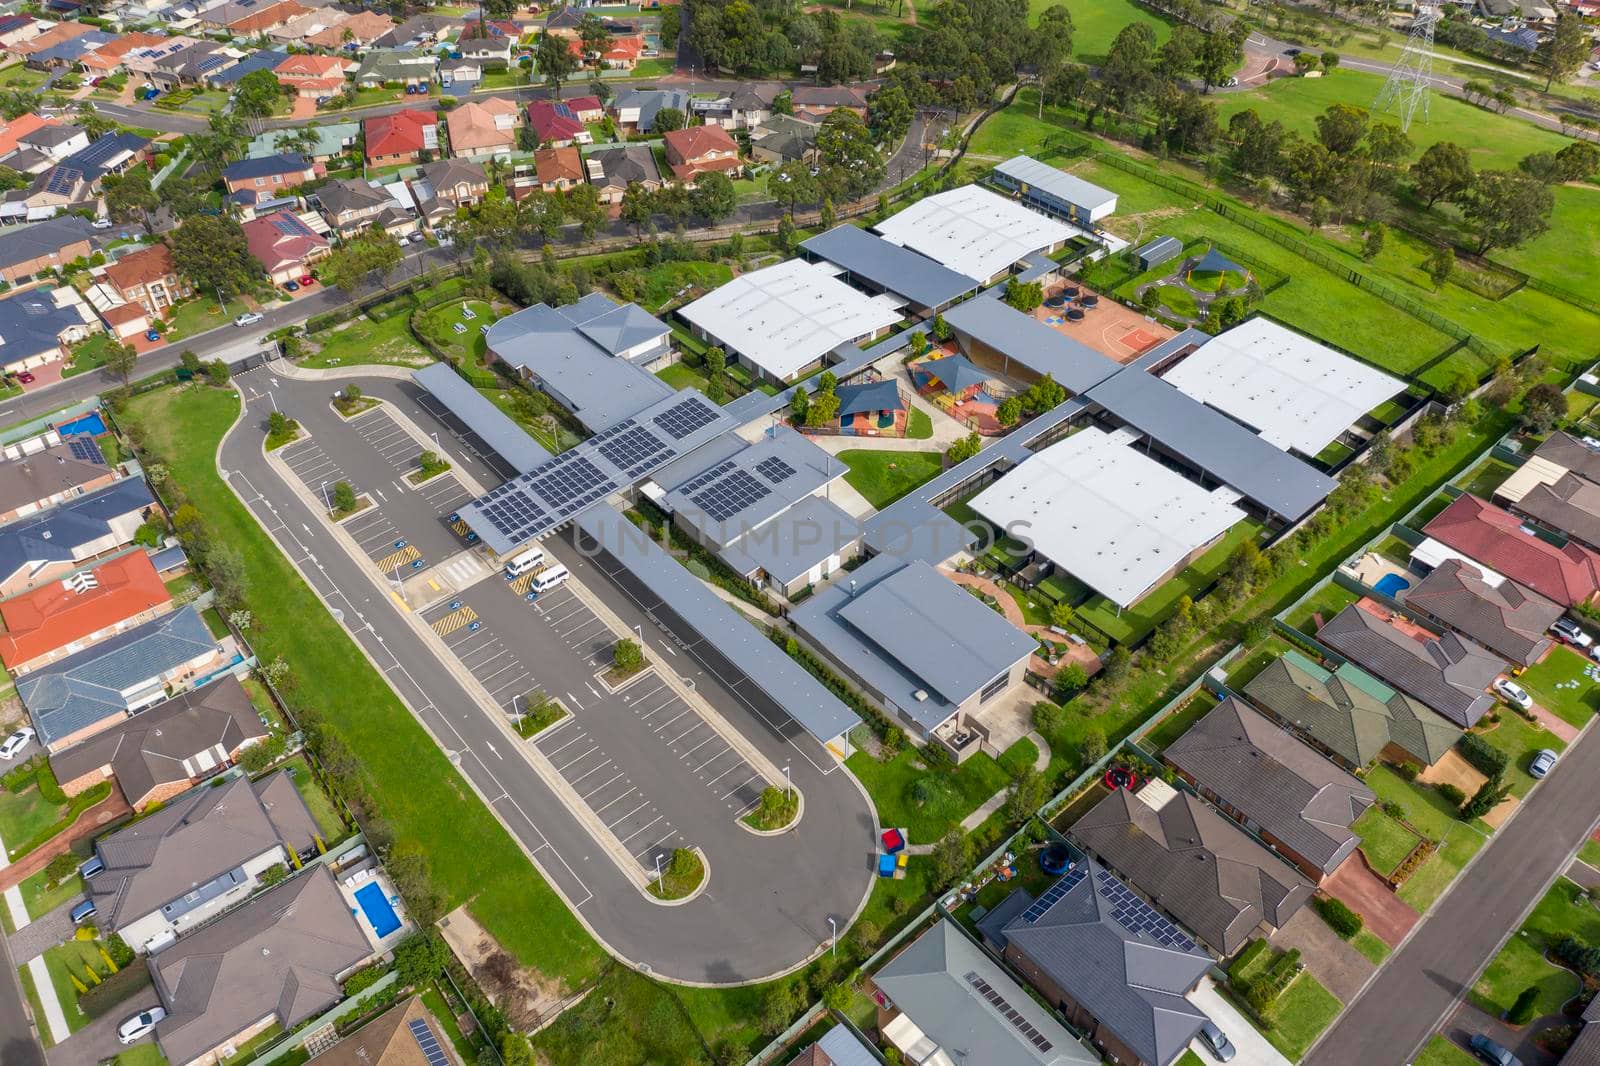 Aerial view of Fernhill School in Glenmore Park by WittkePhotos